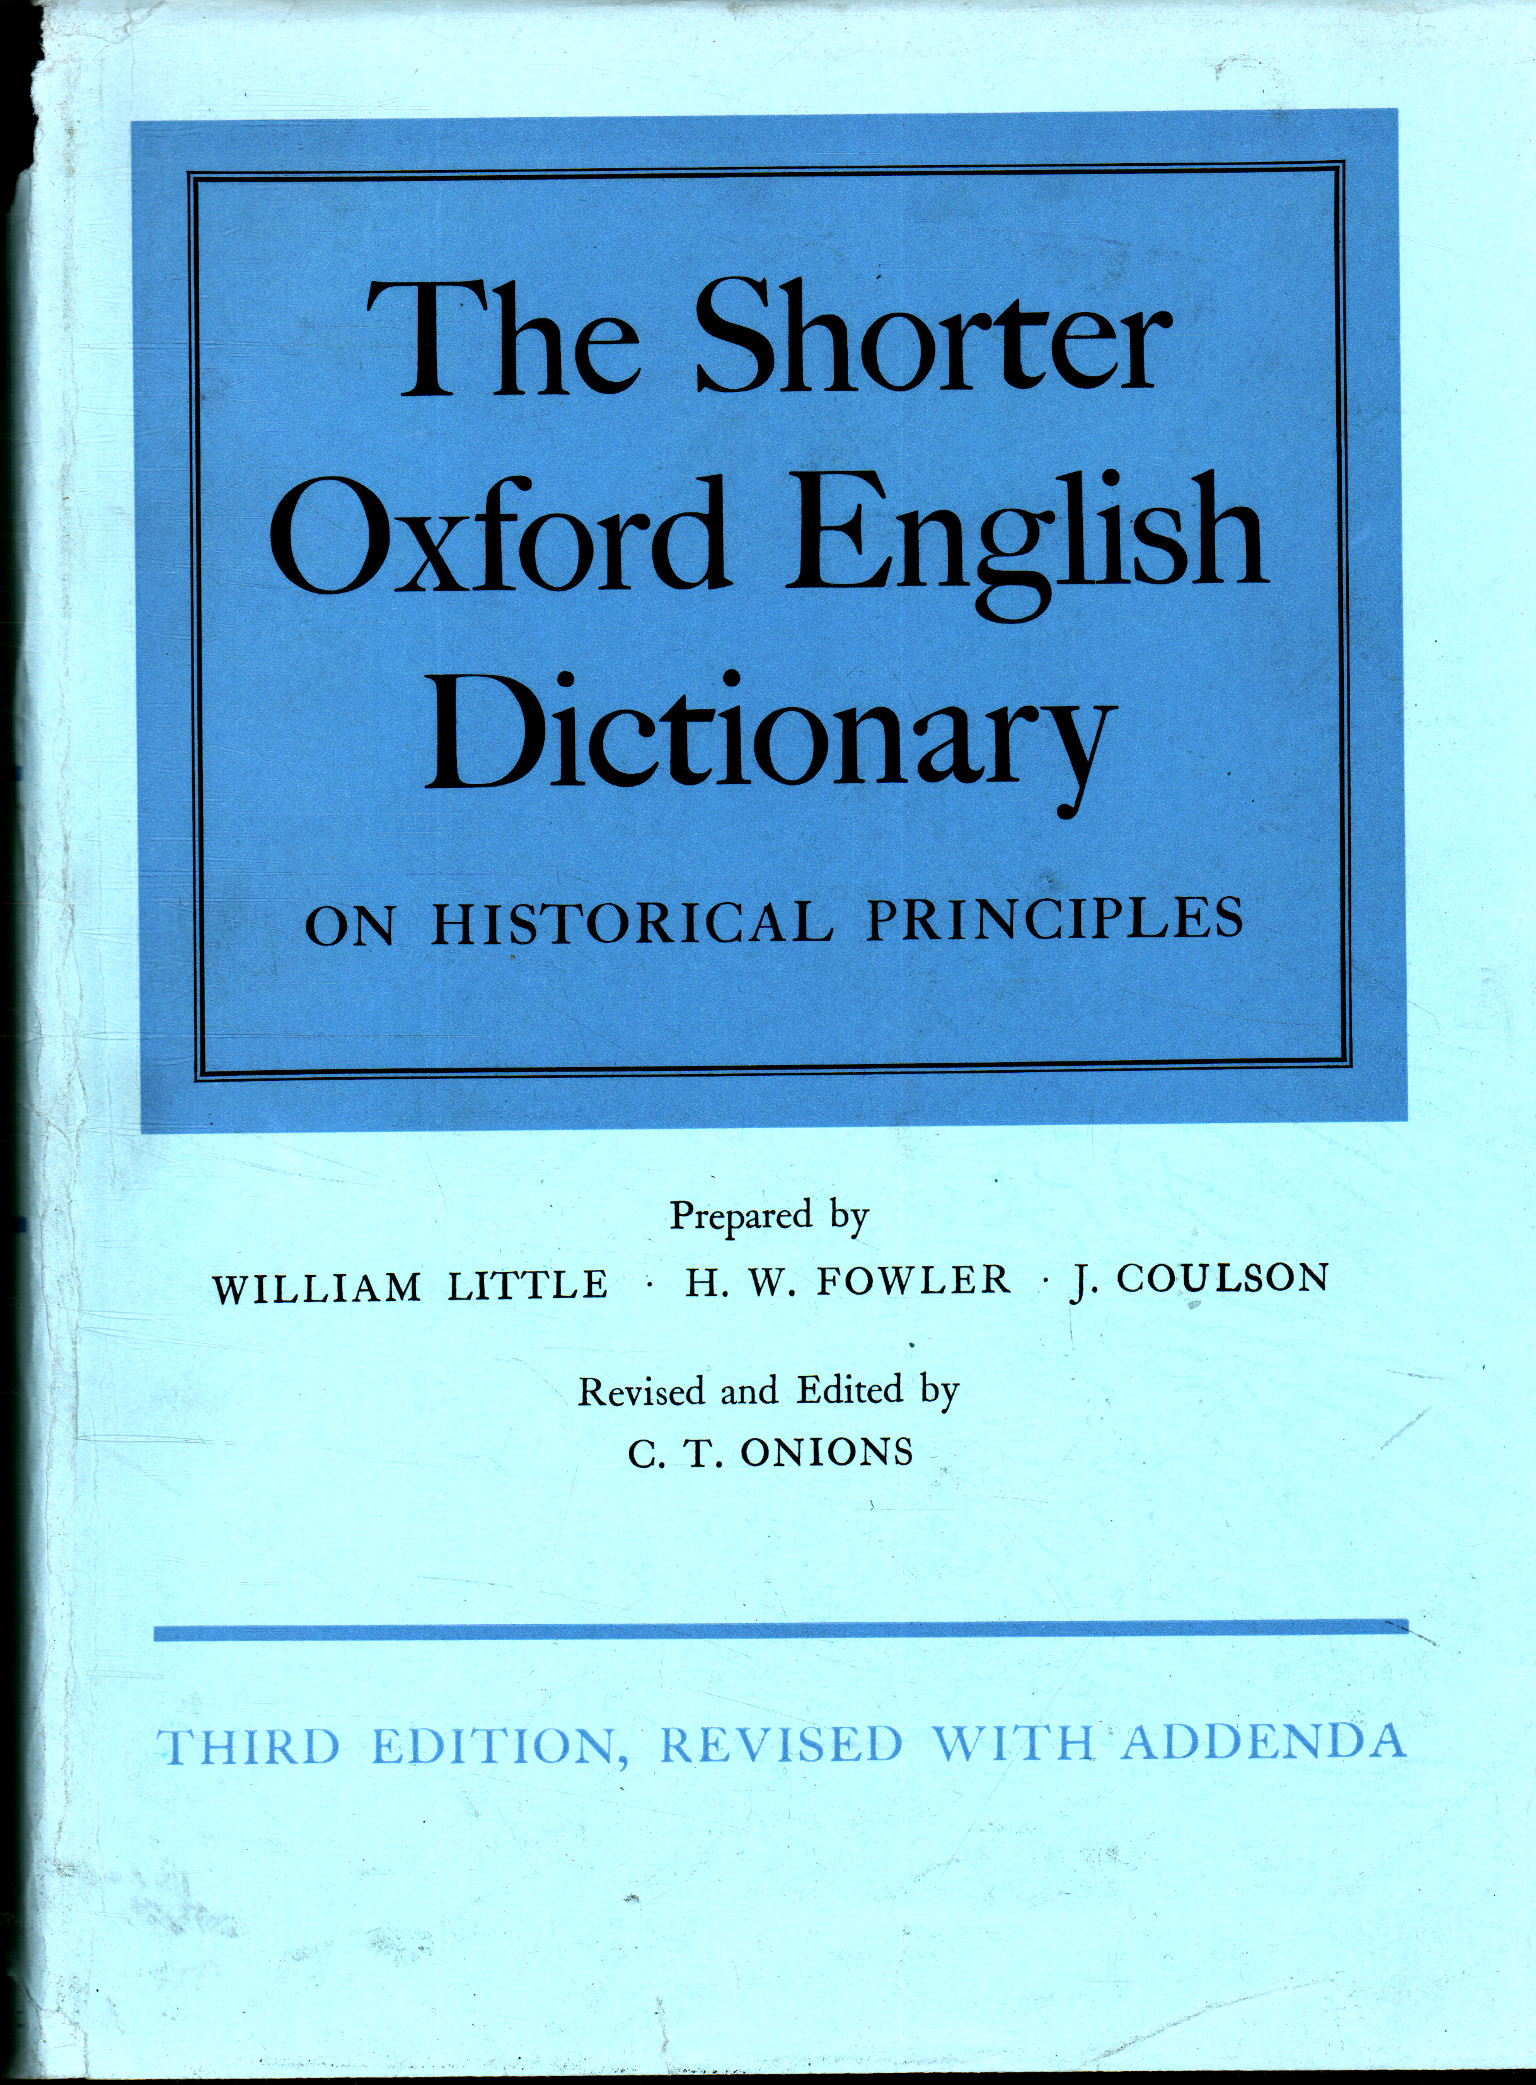 The Shorter Oxford English Dictionary on